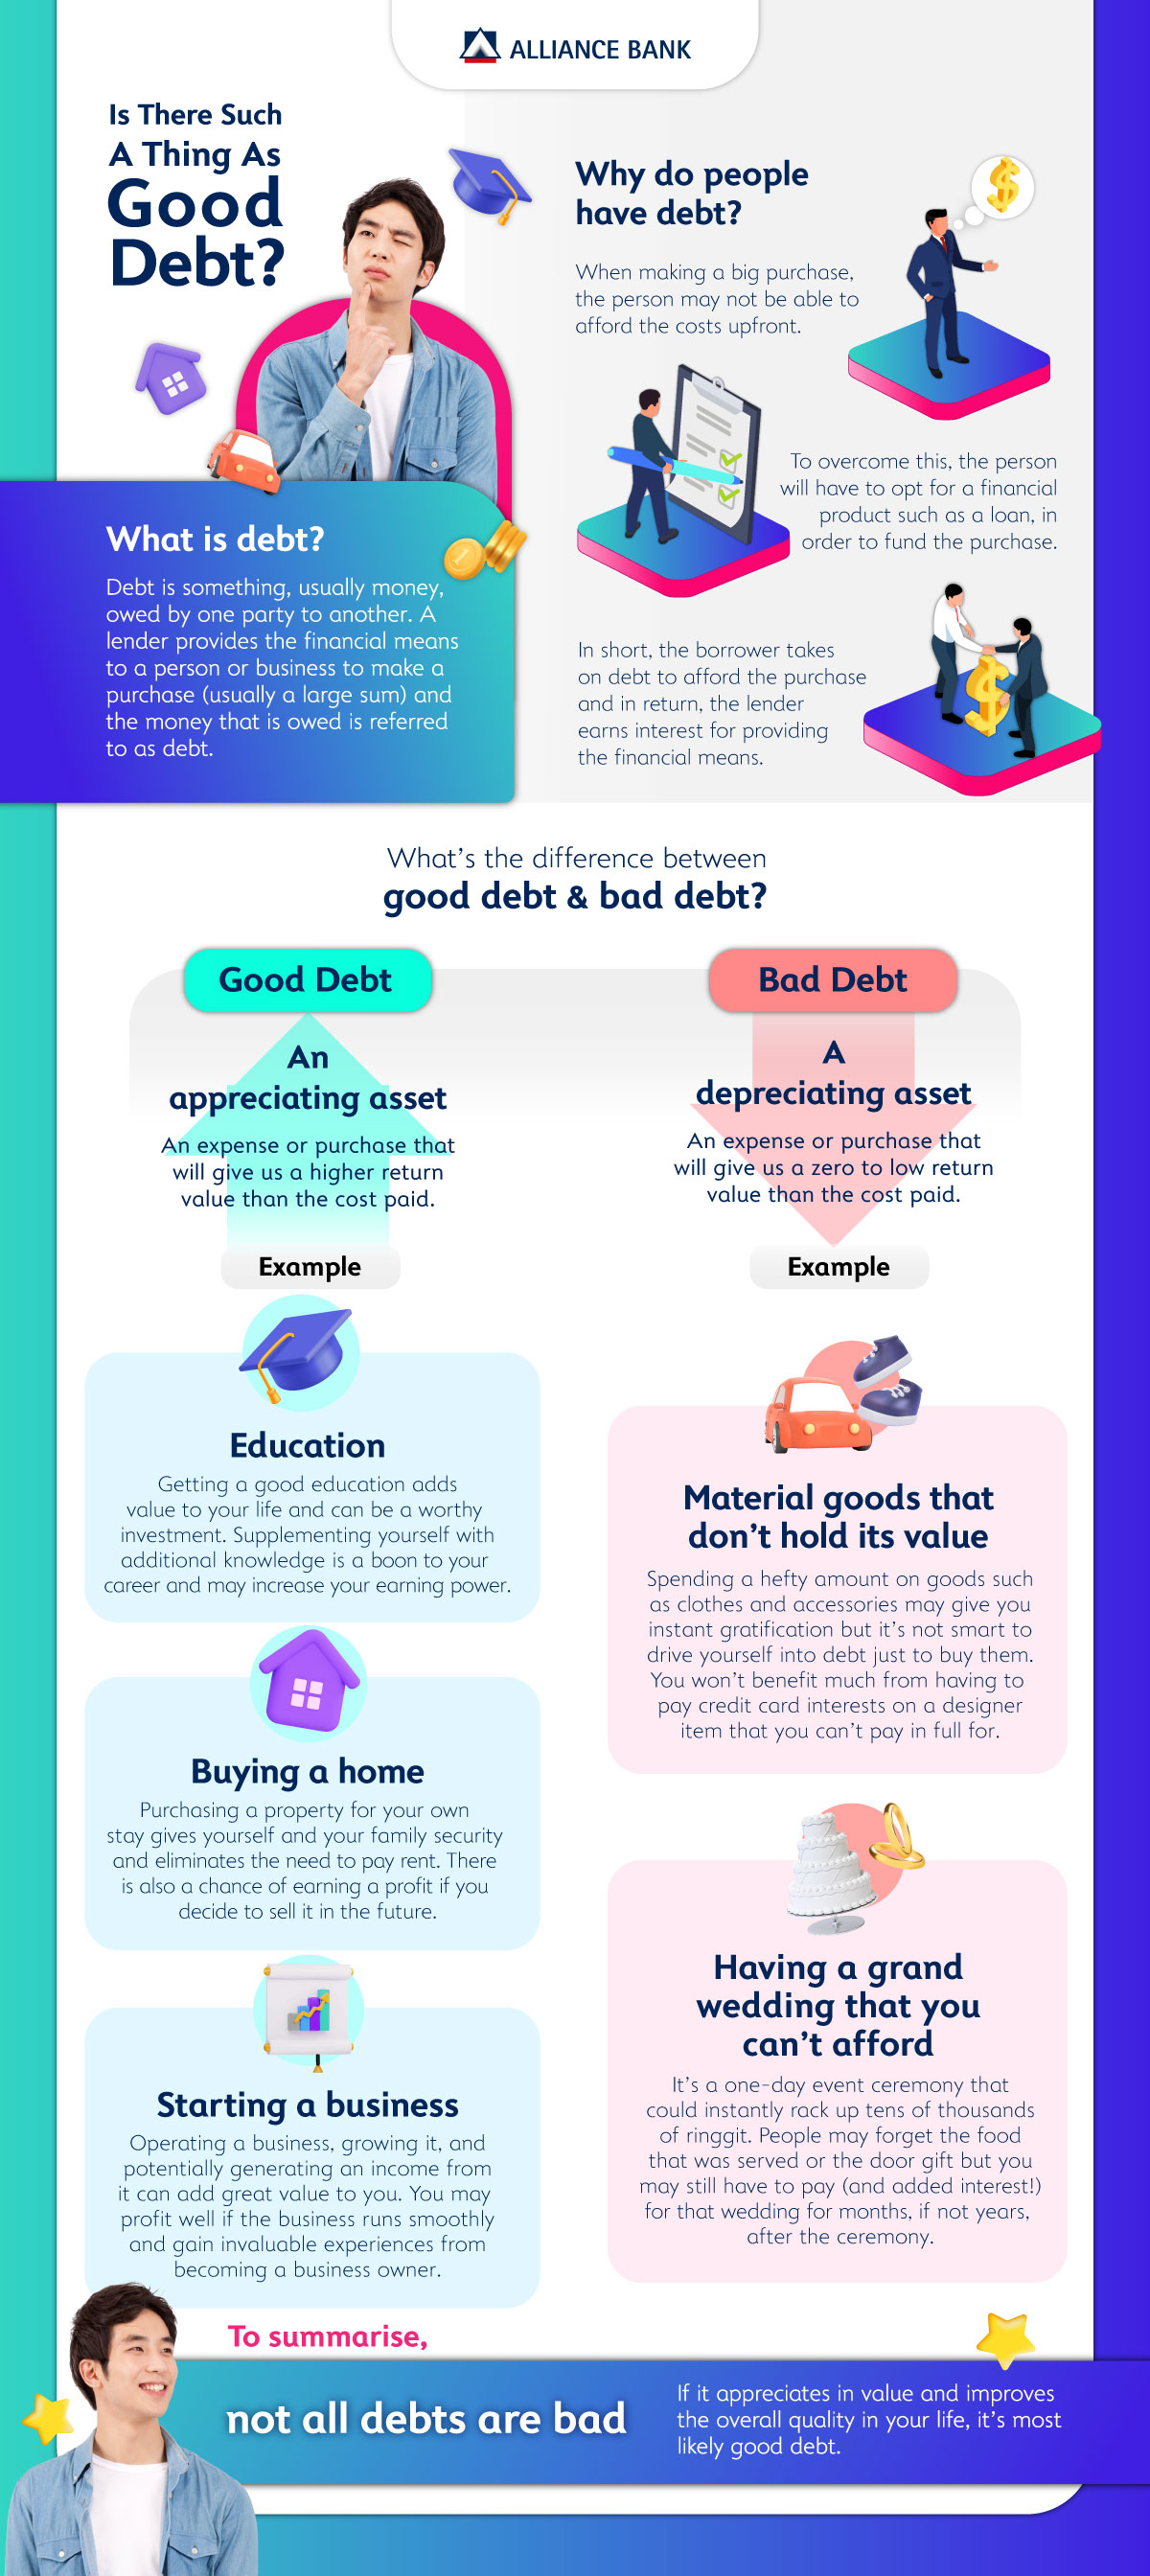 Is There Such A Thing As Good Debt?